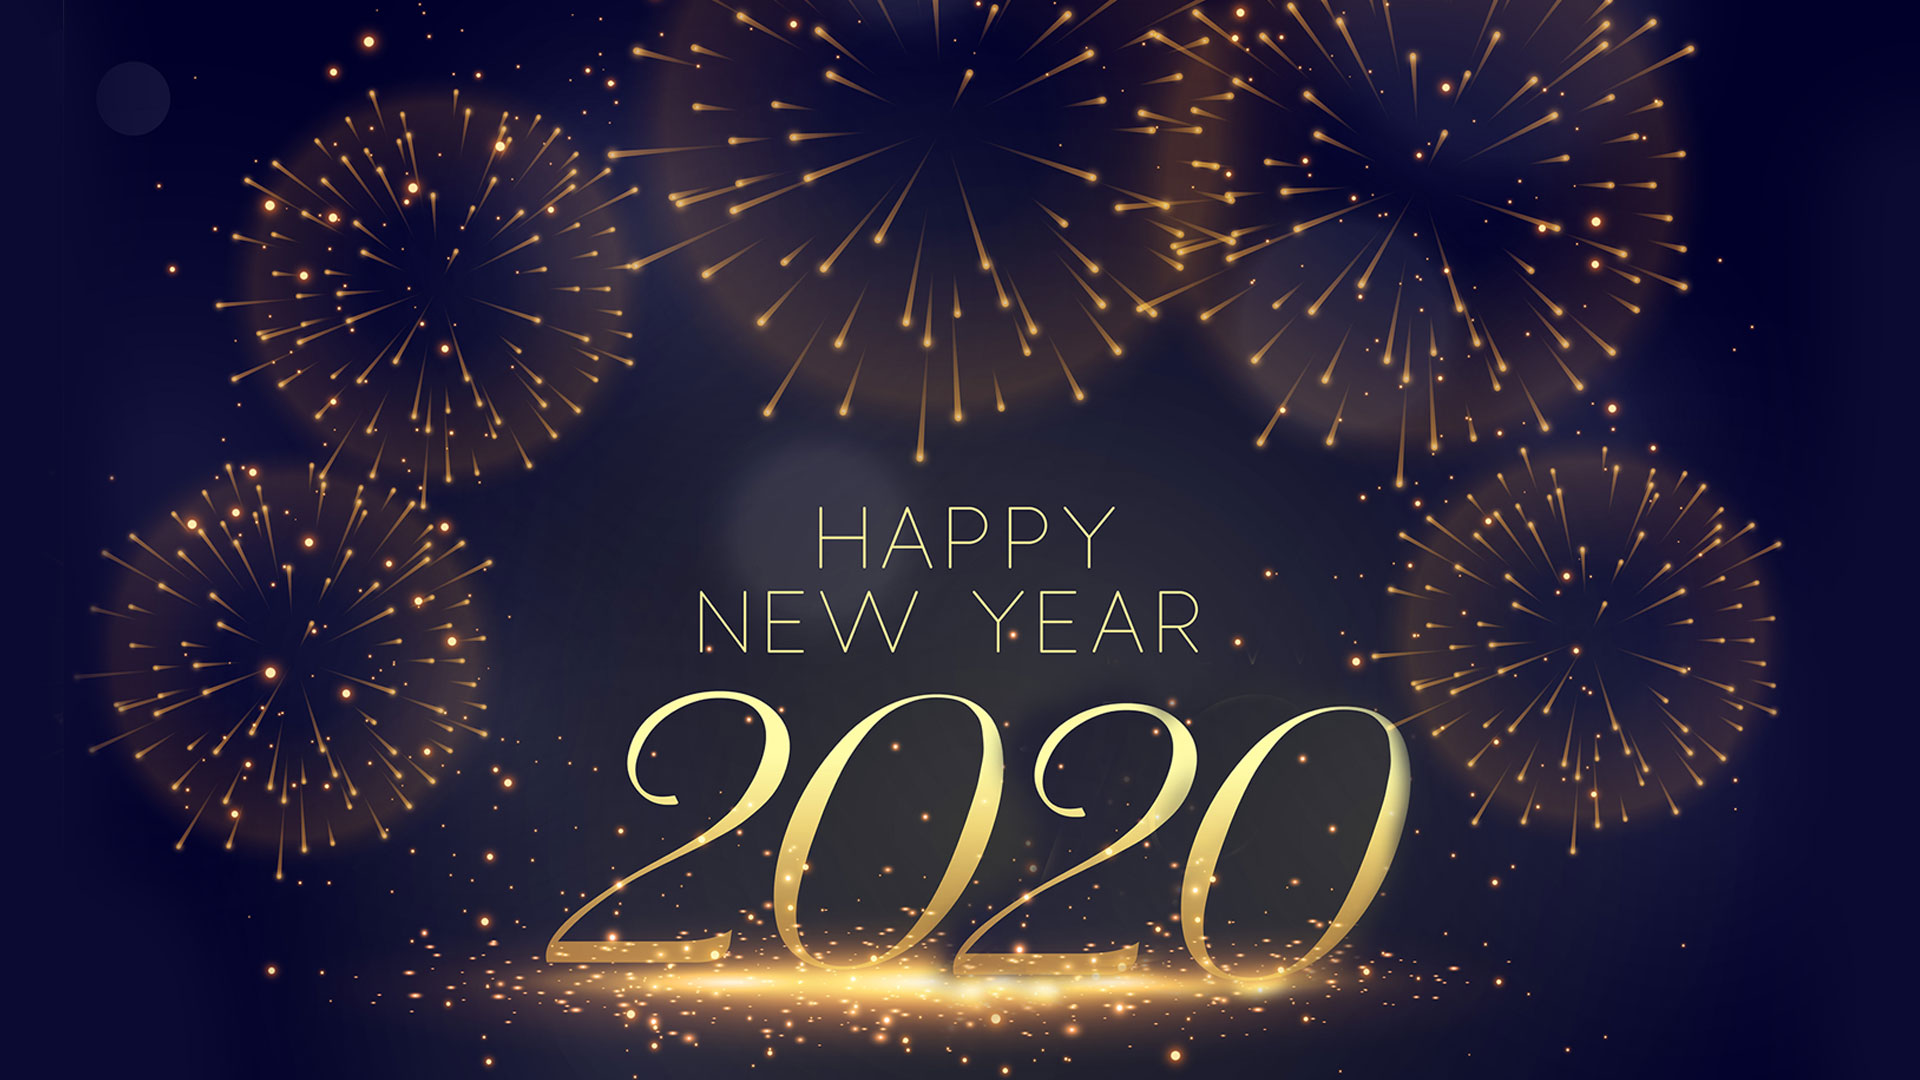 New Year 2020 Picture